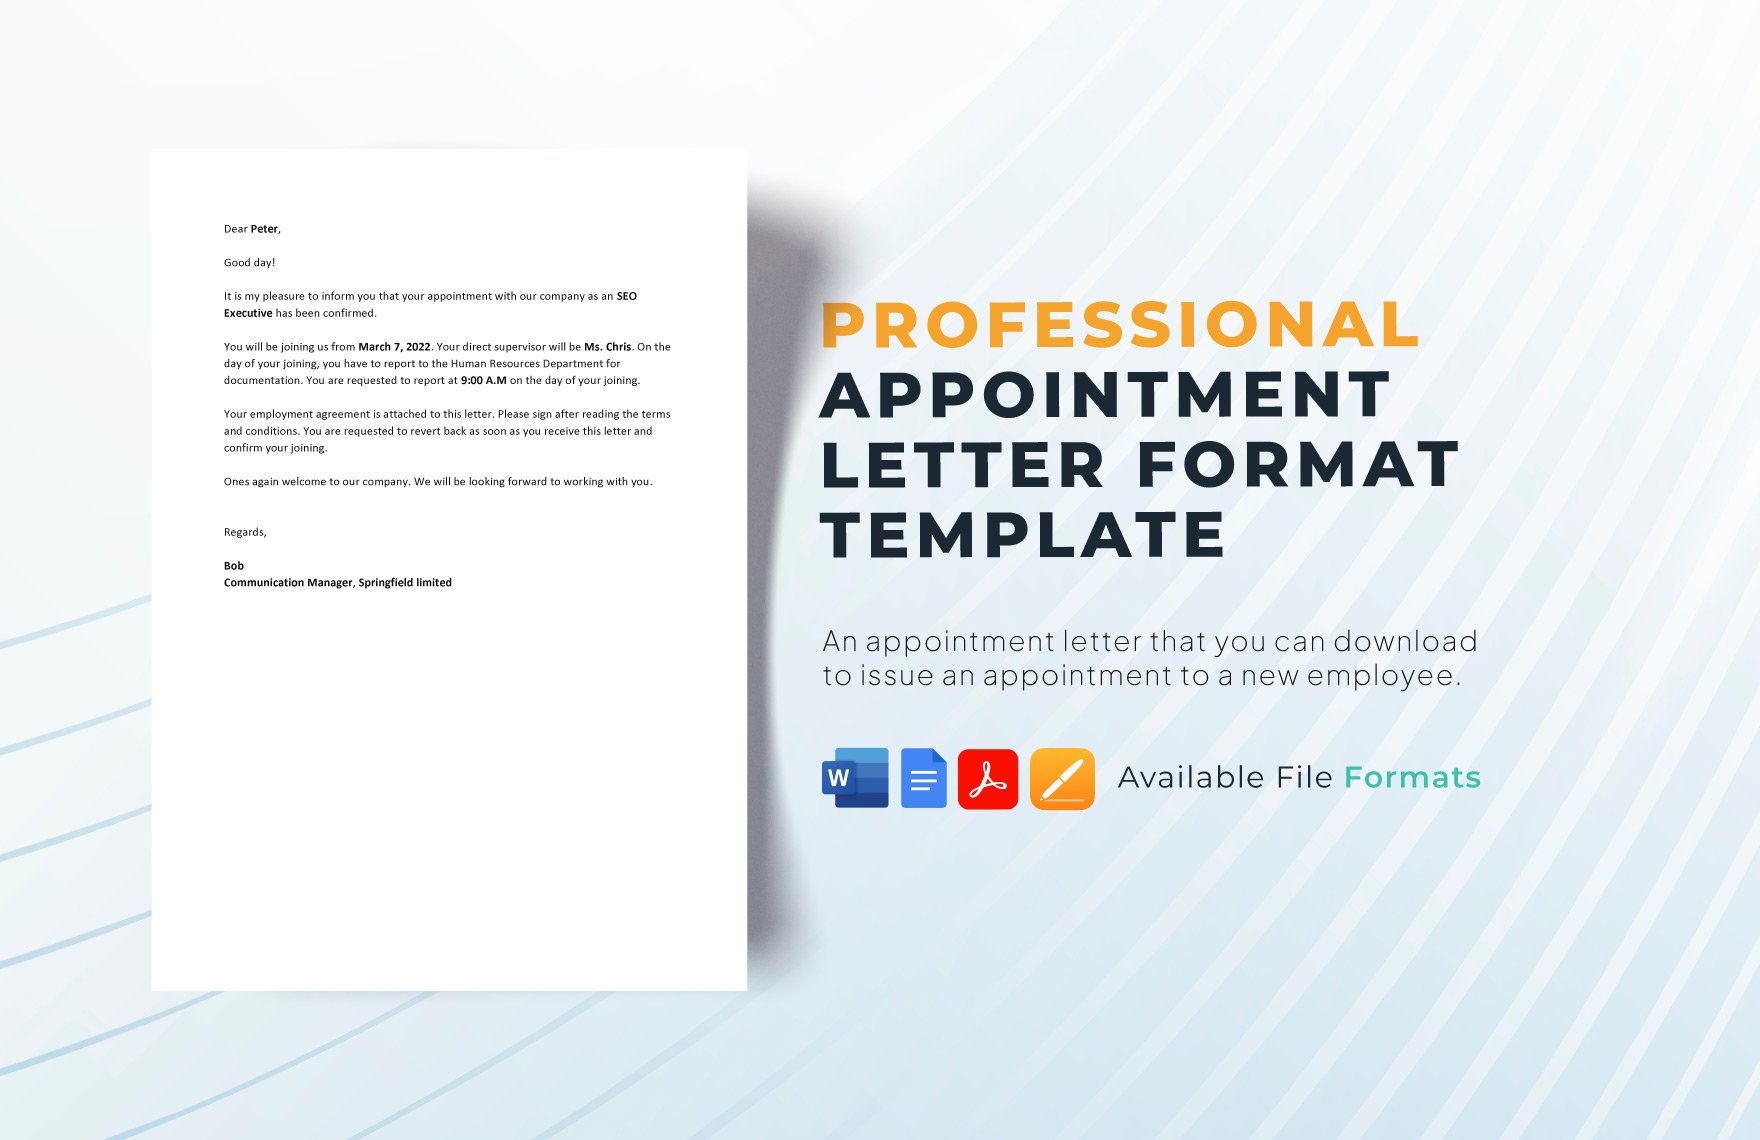 Appointment Letter Format Template